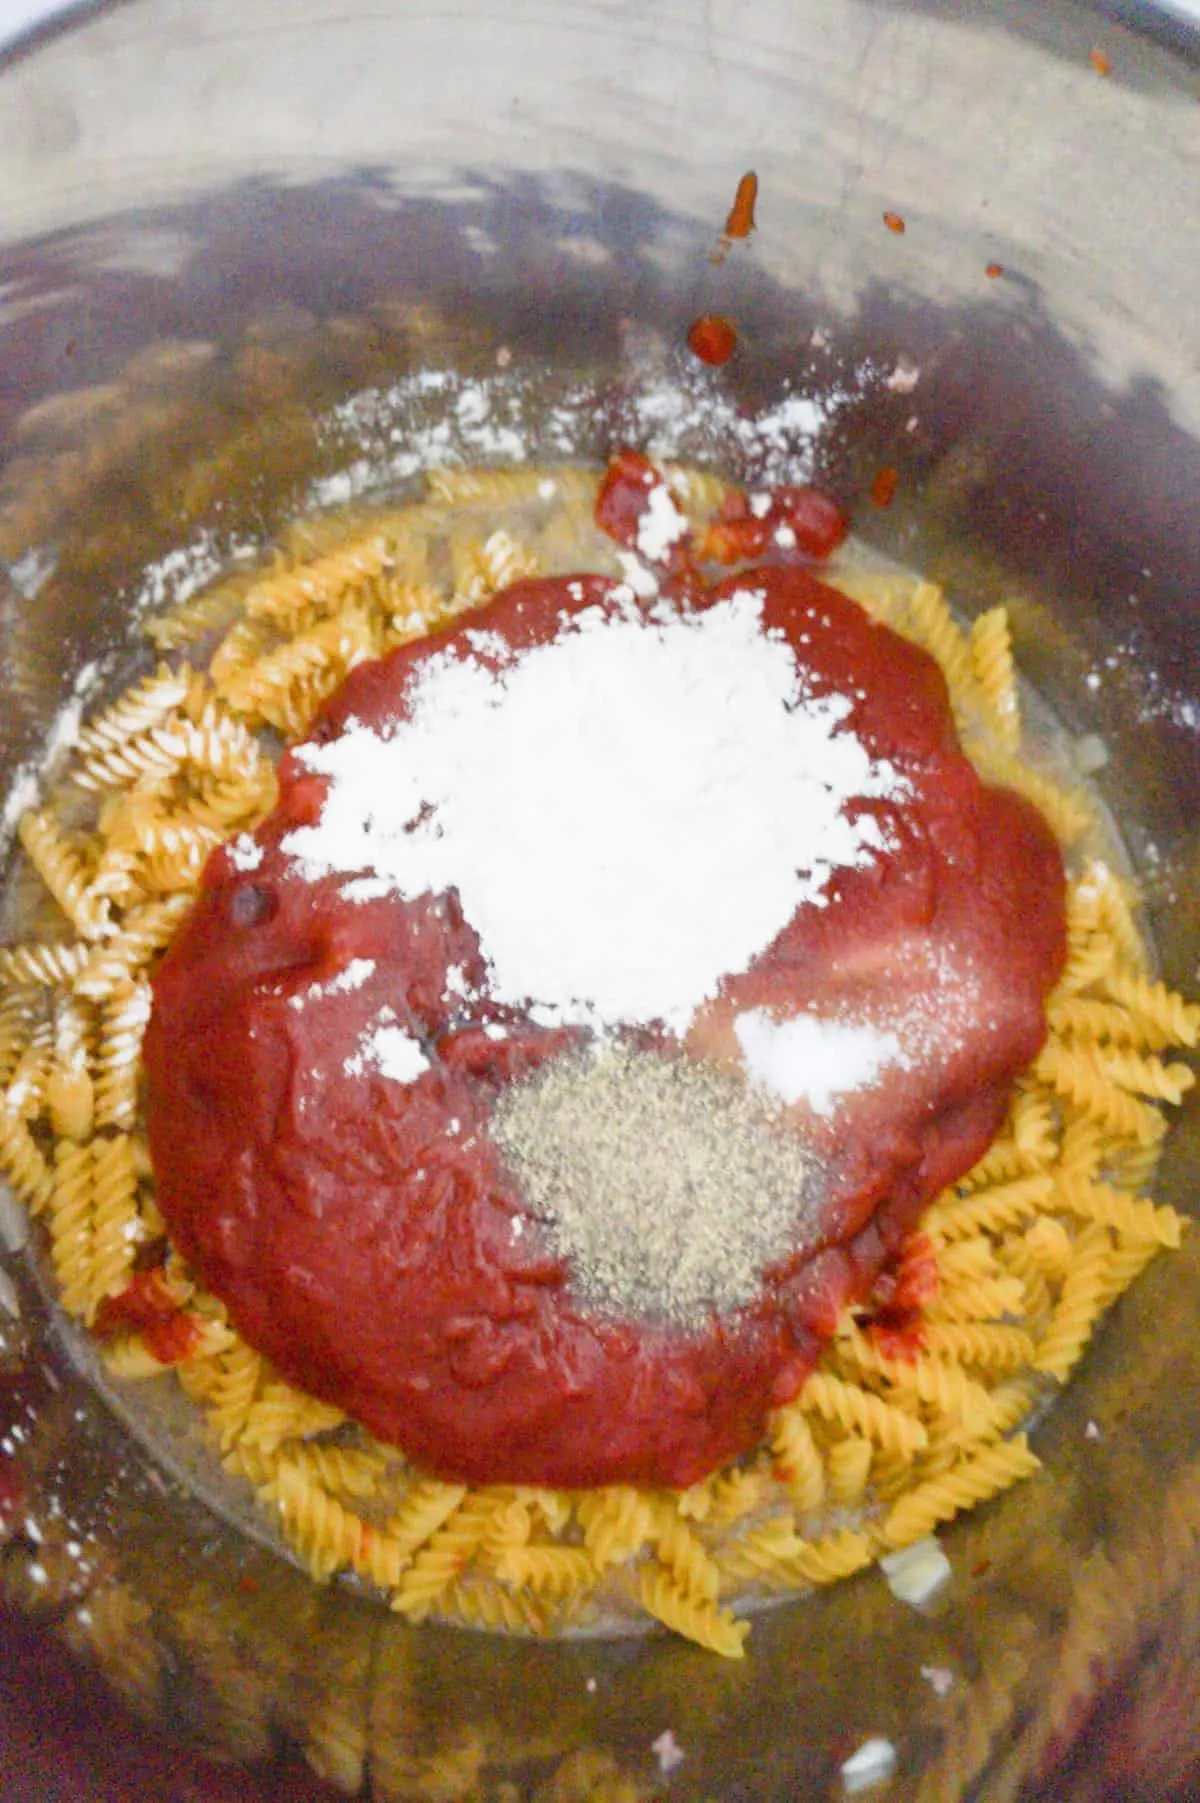 onion powder, pepper and ketchup on top of uncooked fusilli noodles in an Instant Pot